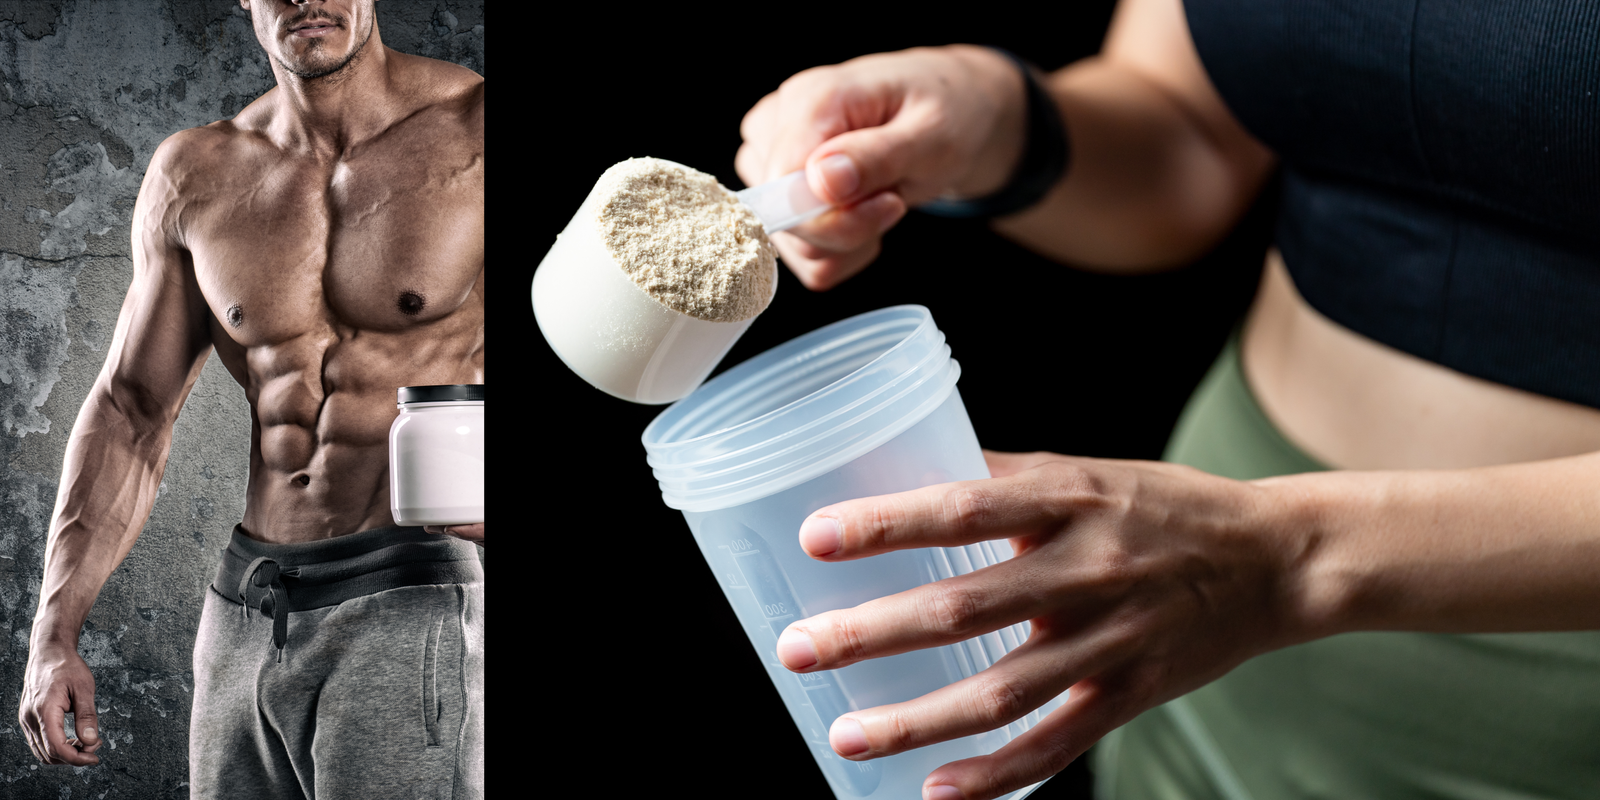 is creatine a steroid?